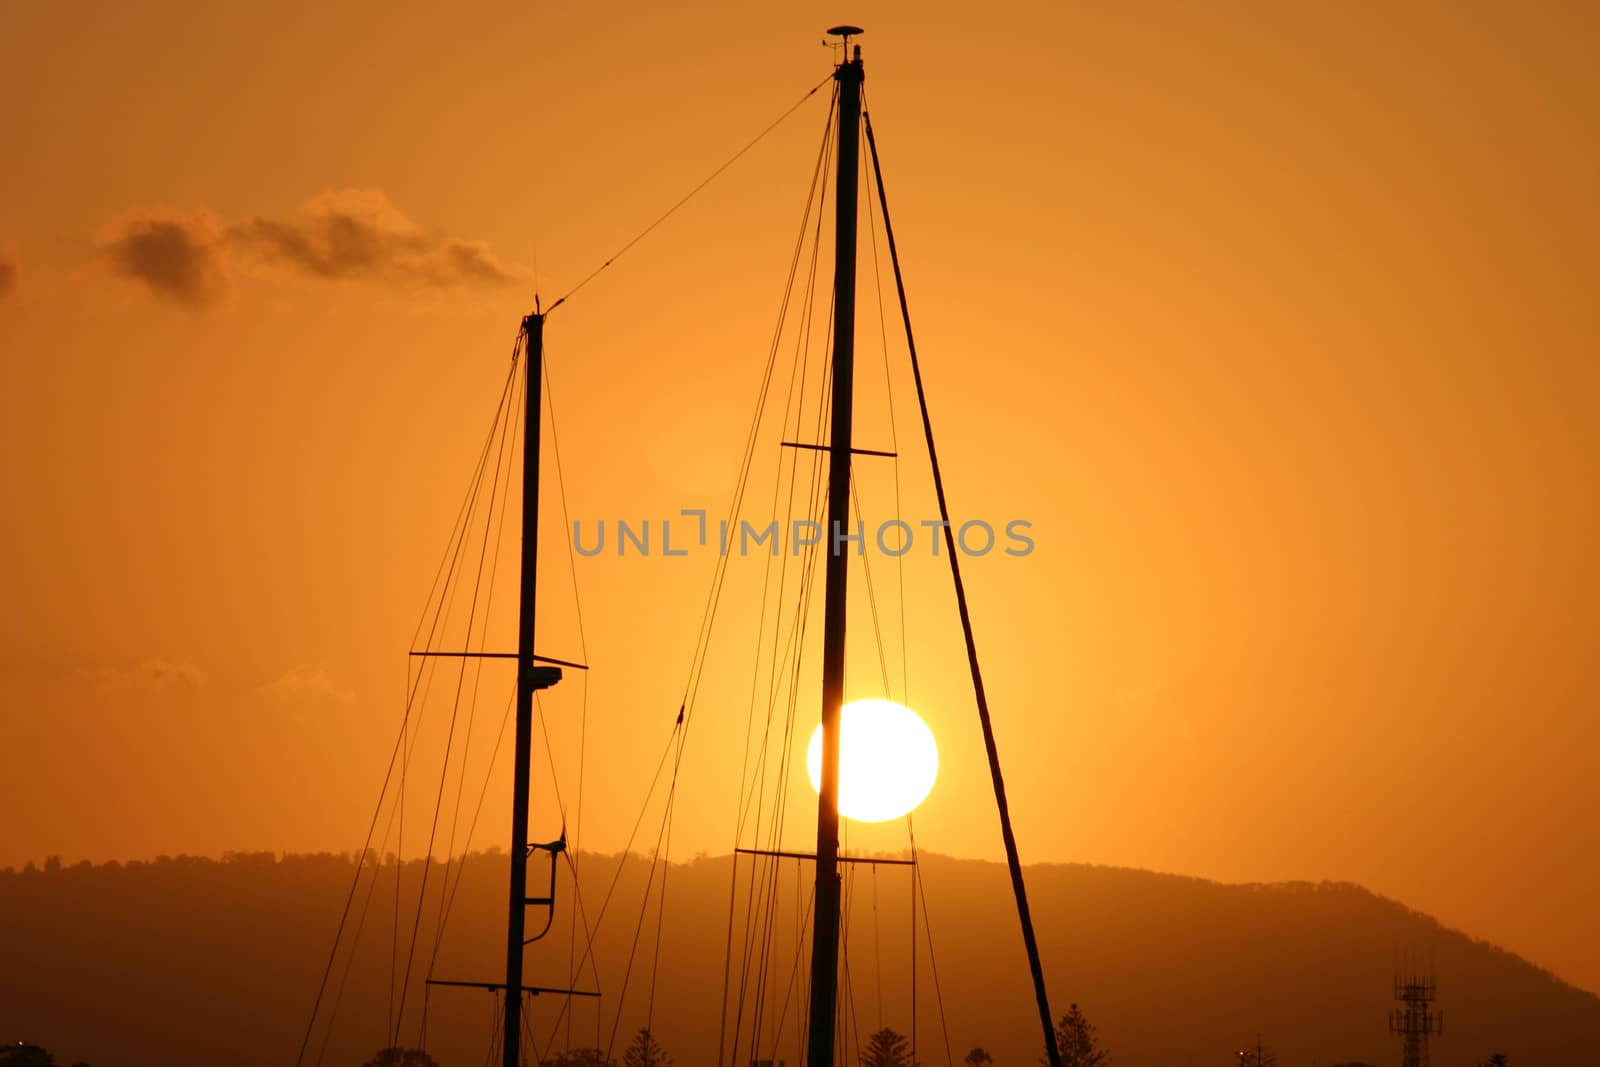 Two masts framed against the setting sun.